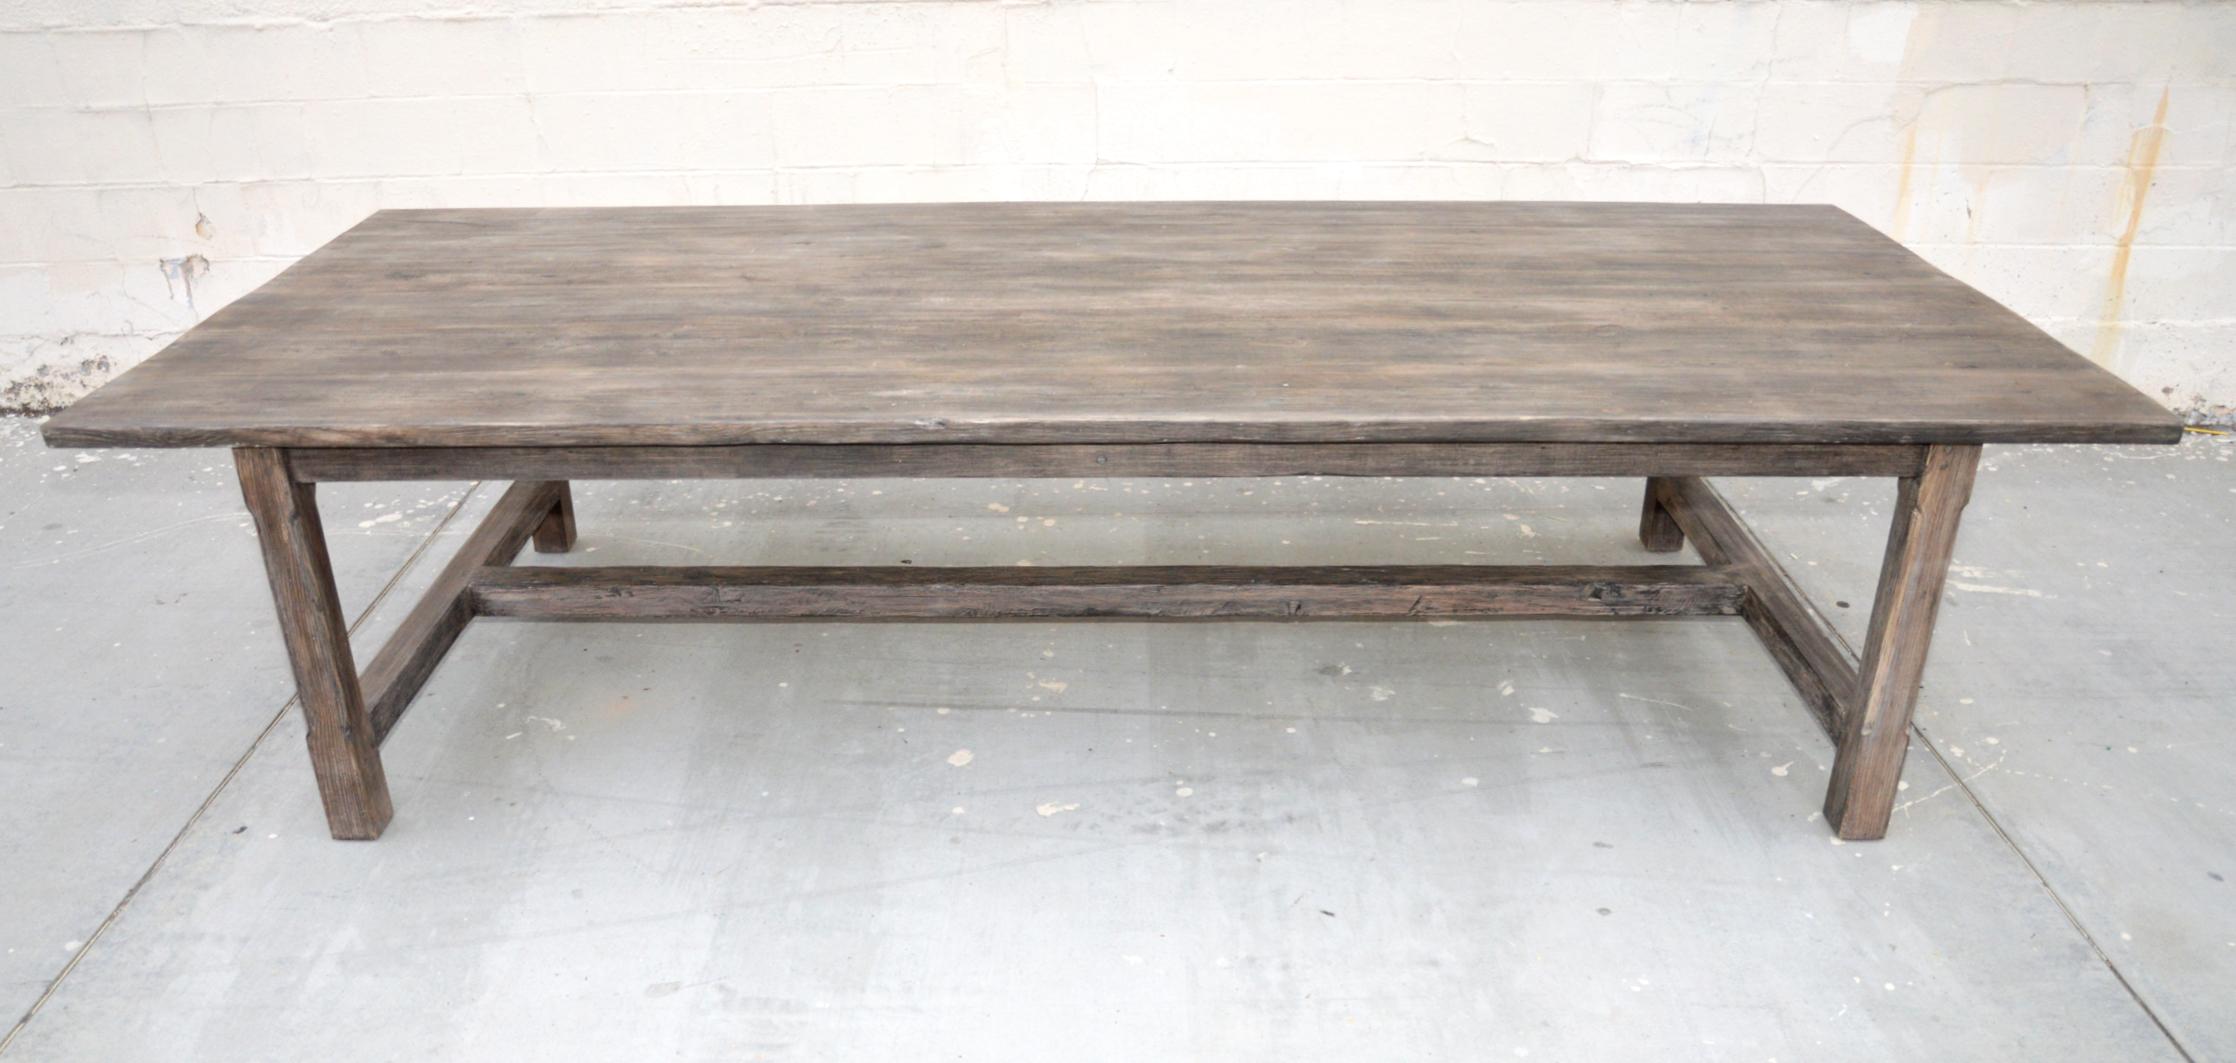 This table is made from hand selected, reclaimed heart-pine, naturally distressed over many decades for a great authentic patina. 

The table seen here is 120